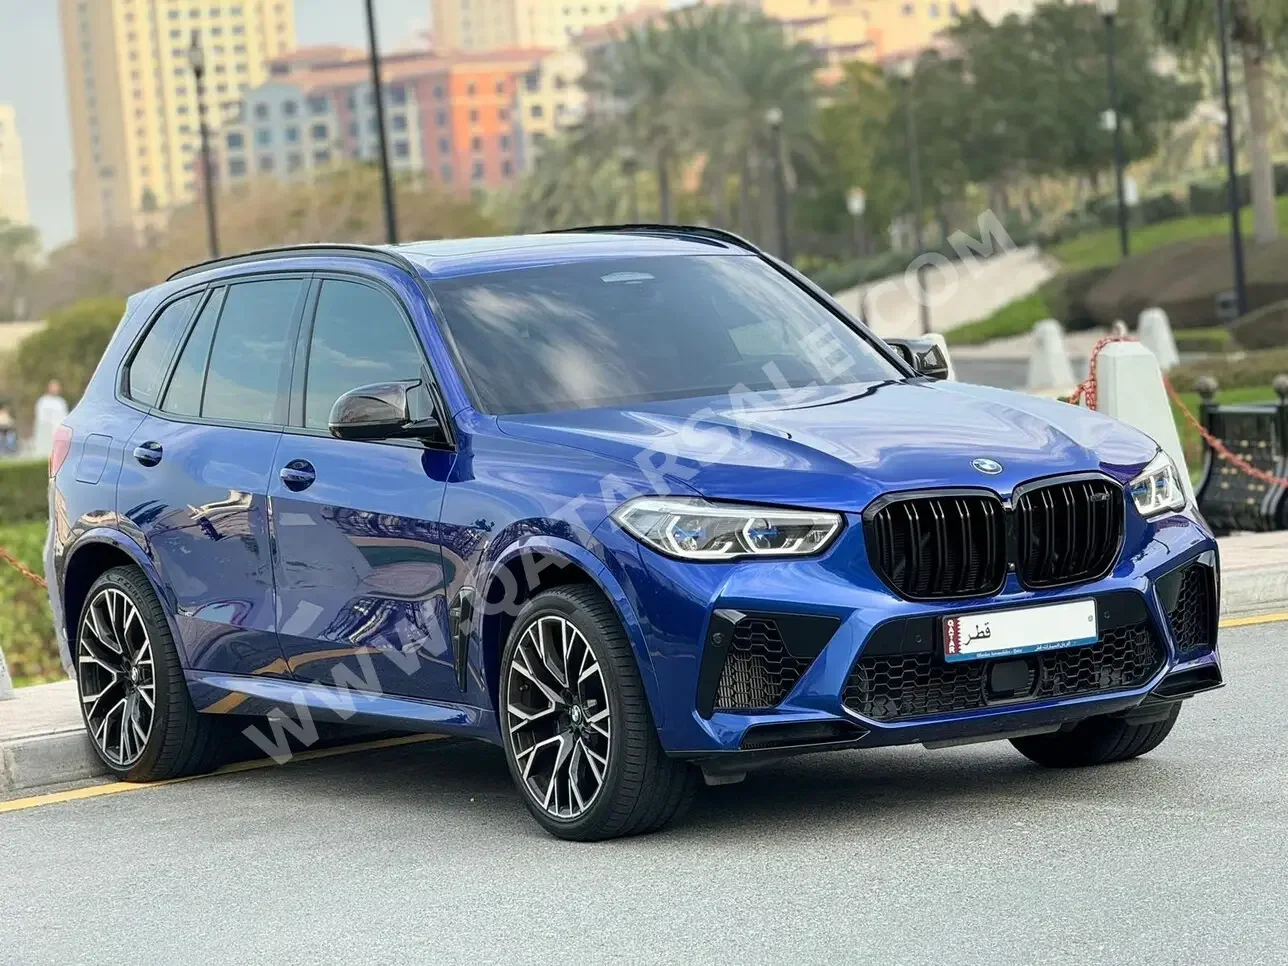 BMW  X-Series  X5 M Competition  2020  Automatic  59,000 Km  8 Cylinder  Four Wheel Drive (4WD)  SUV  Blue  With Warranty